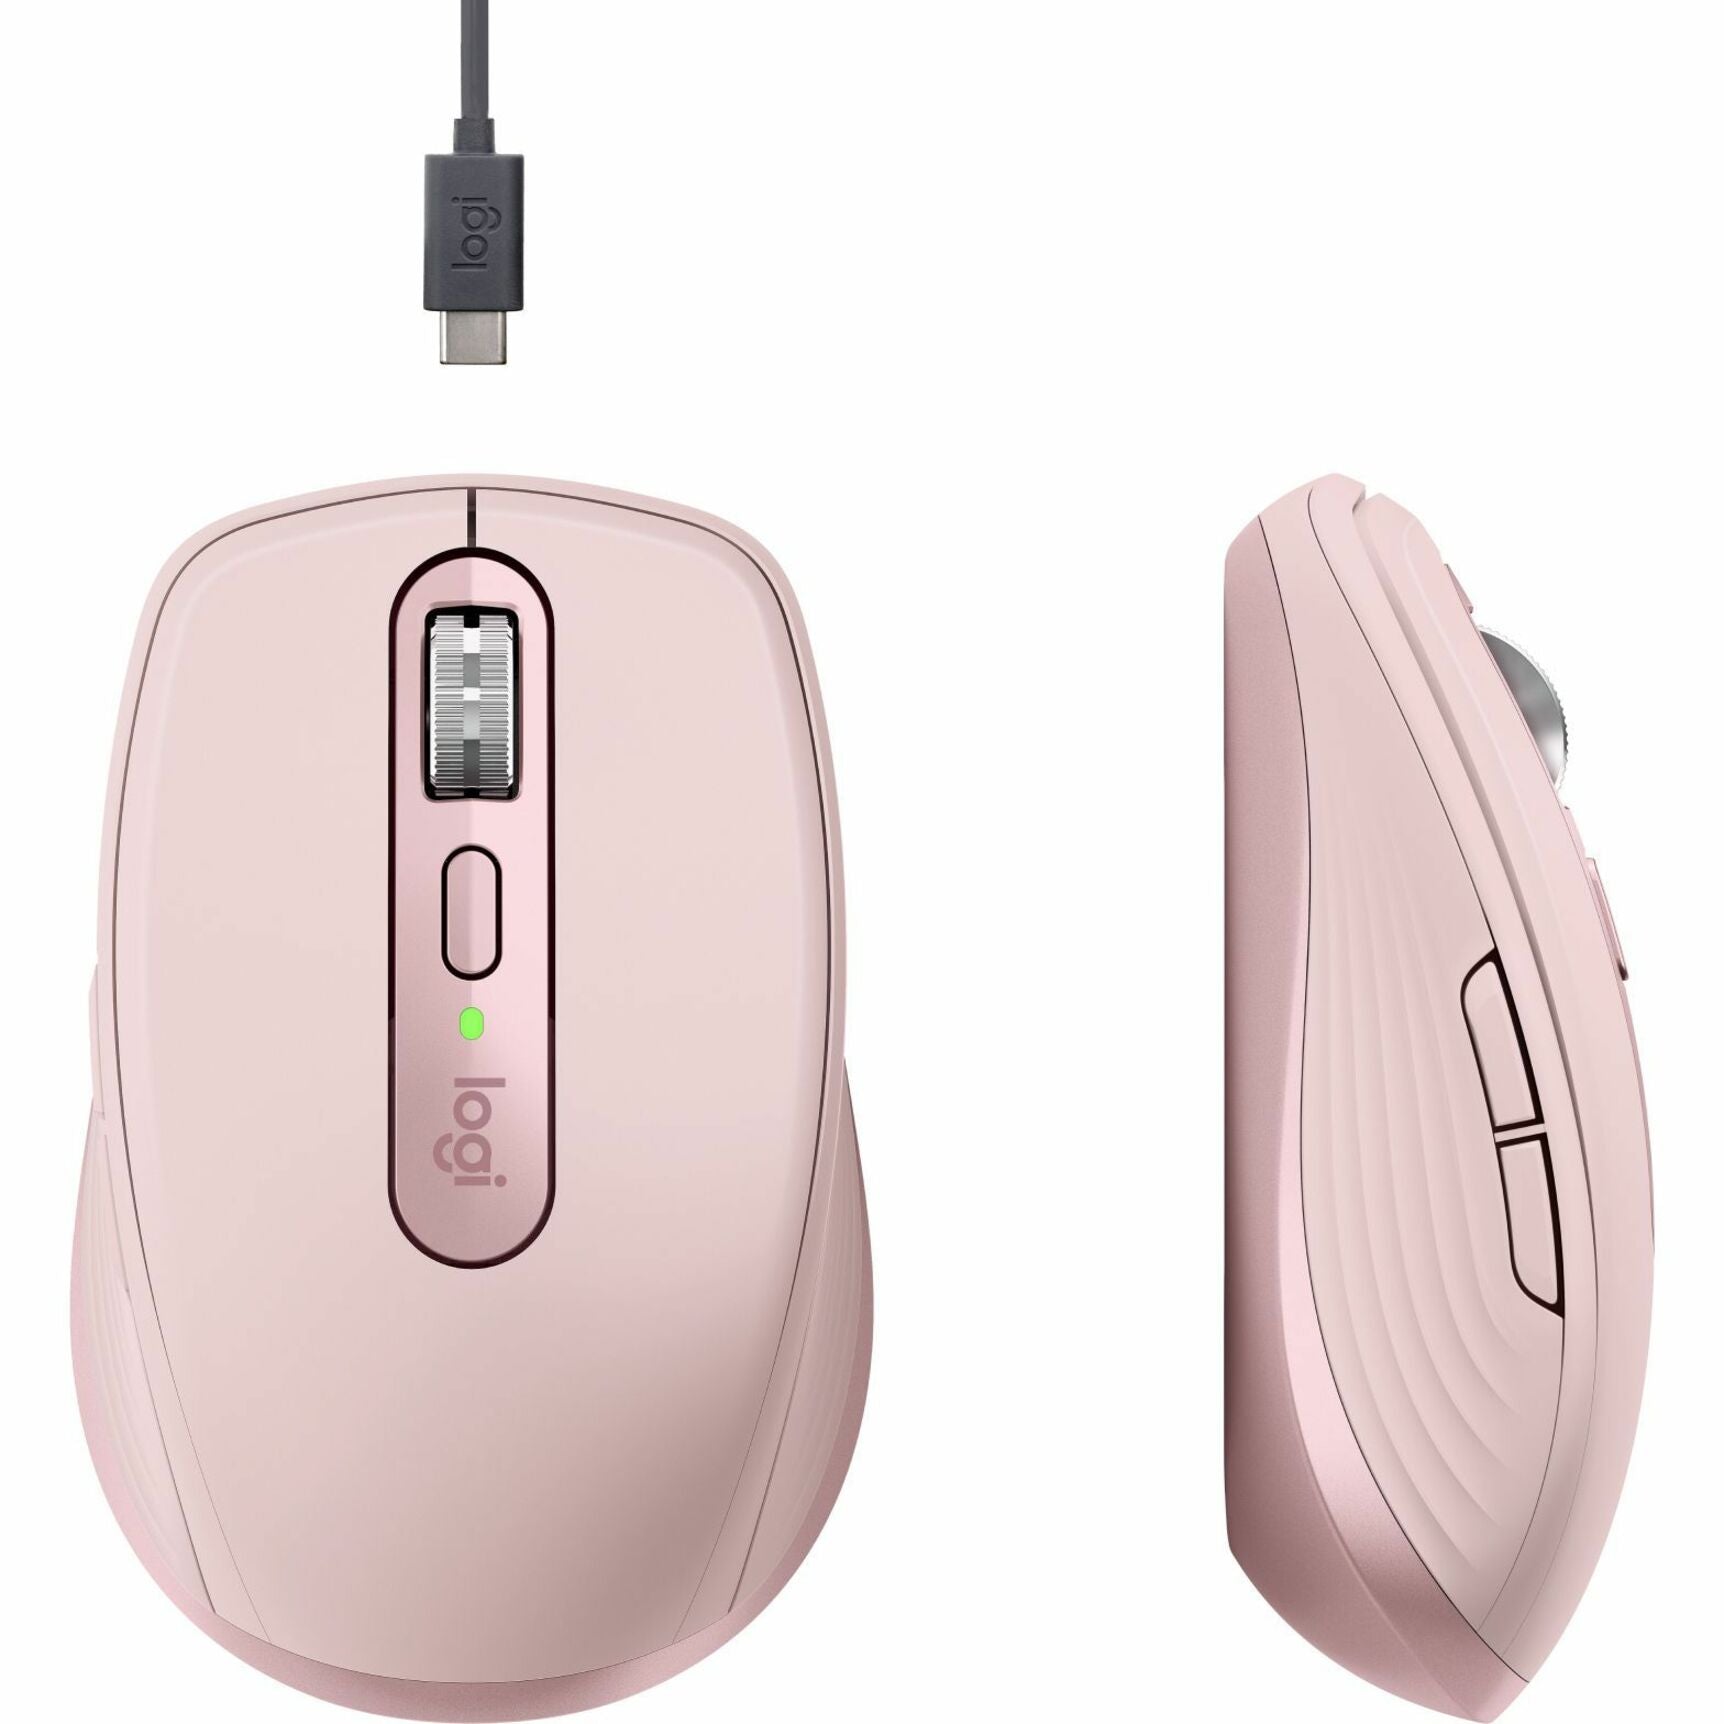 Logitech 910-006927 Mouse, Rose, Environmentally Friendly, RoHS, WEEE